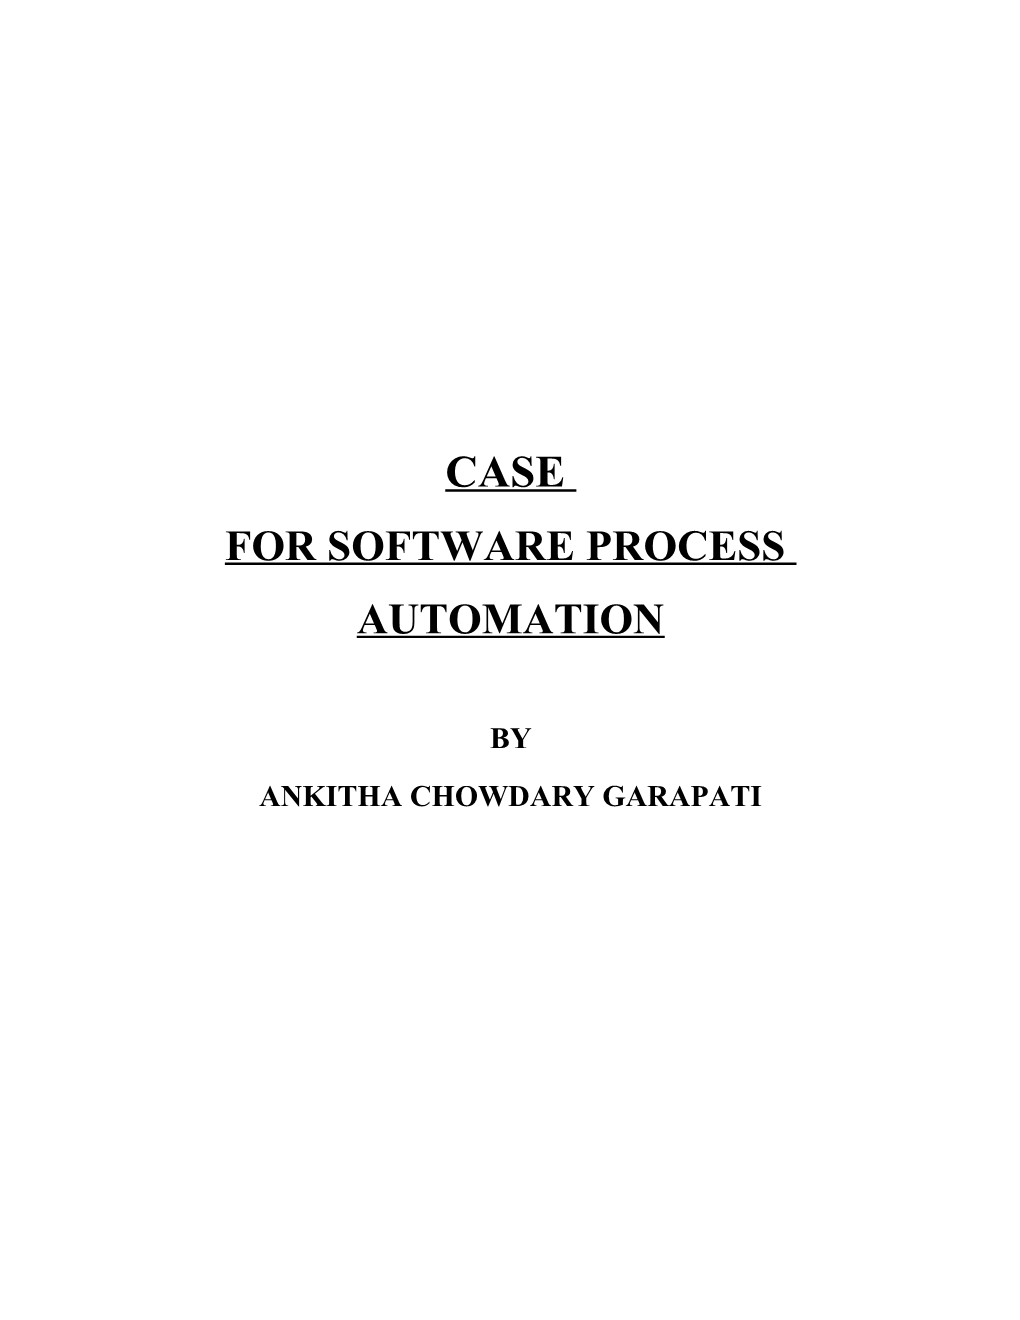 For Software Process